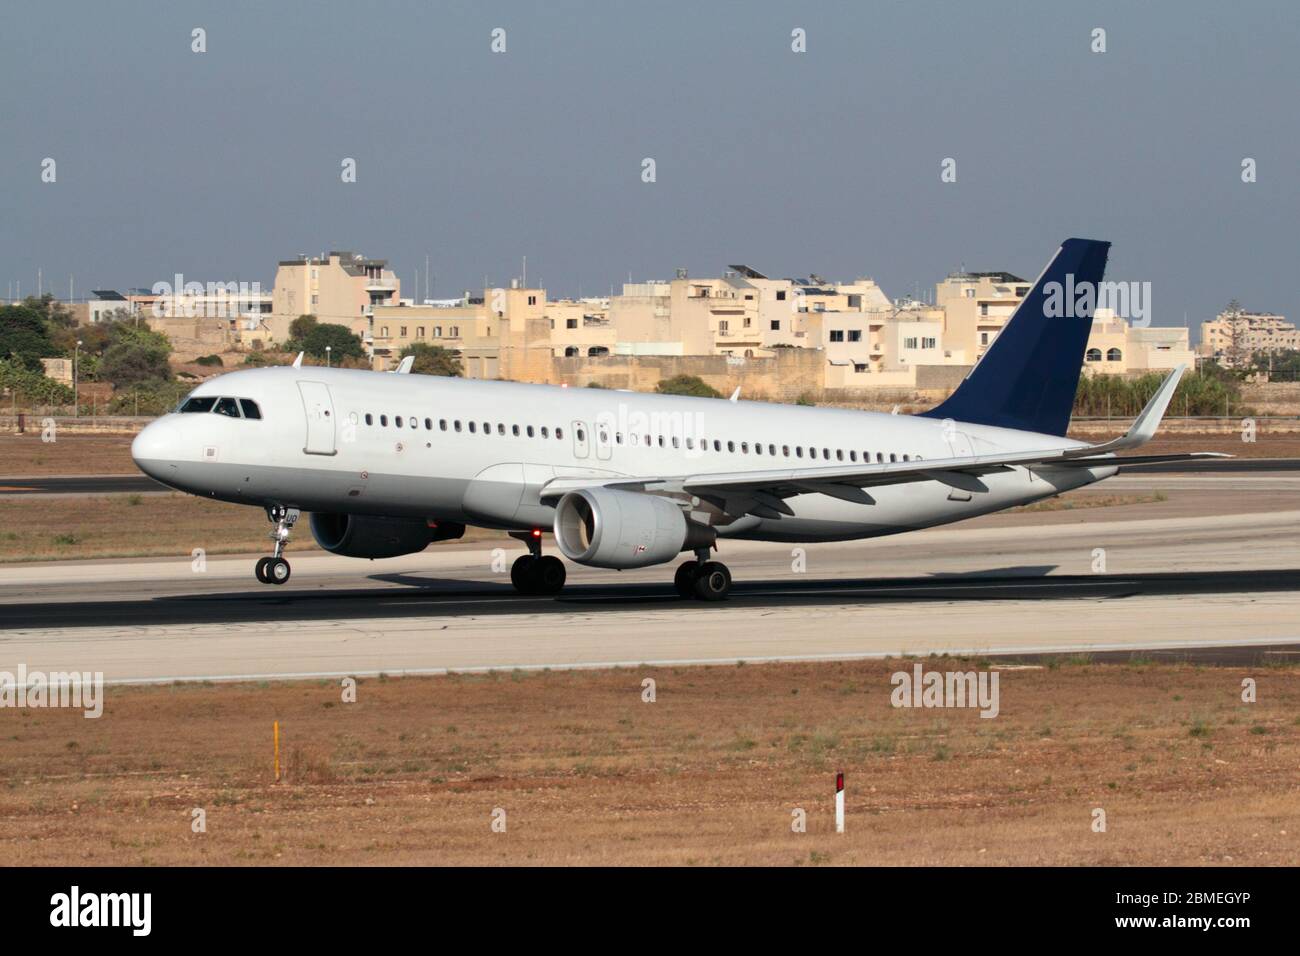 Airbus A320 airliner jet plane aircraft airplane taking off takeoff runway modern air travel holiday civil aviation Stock Photo